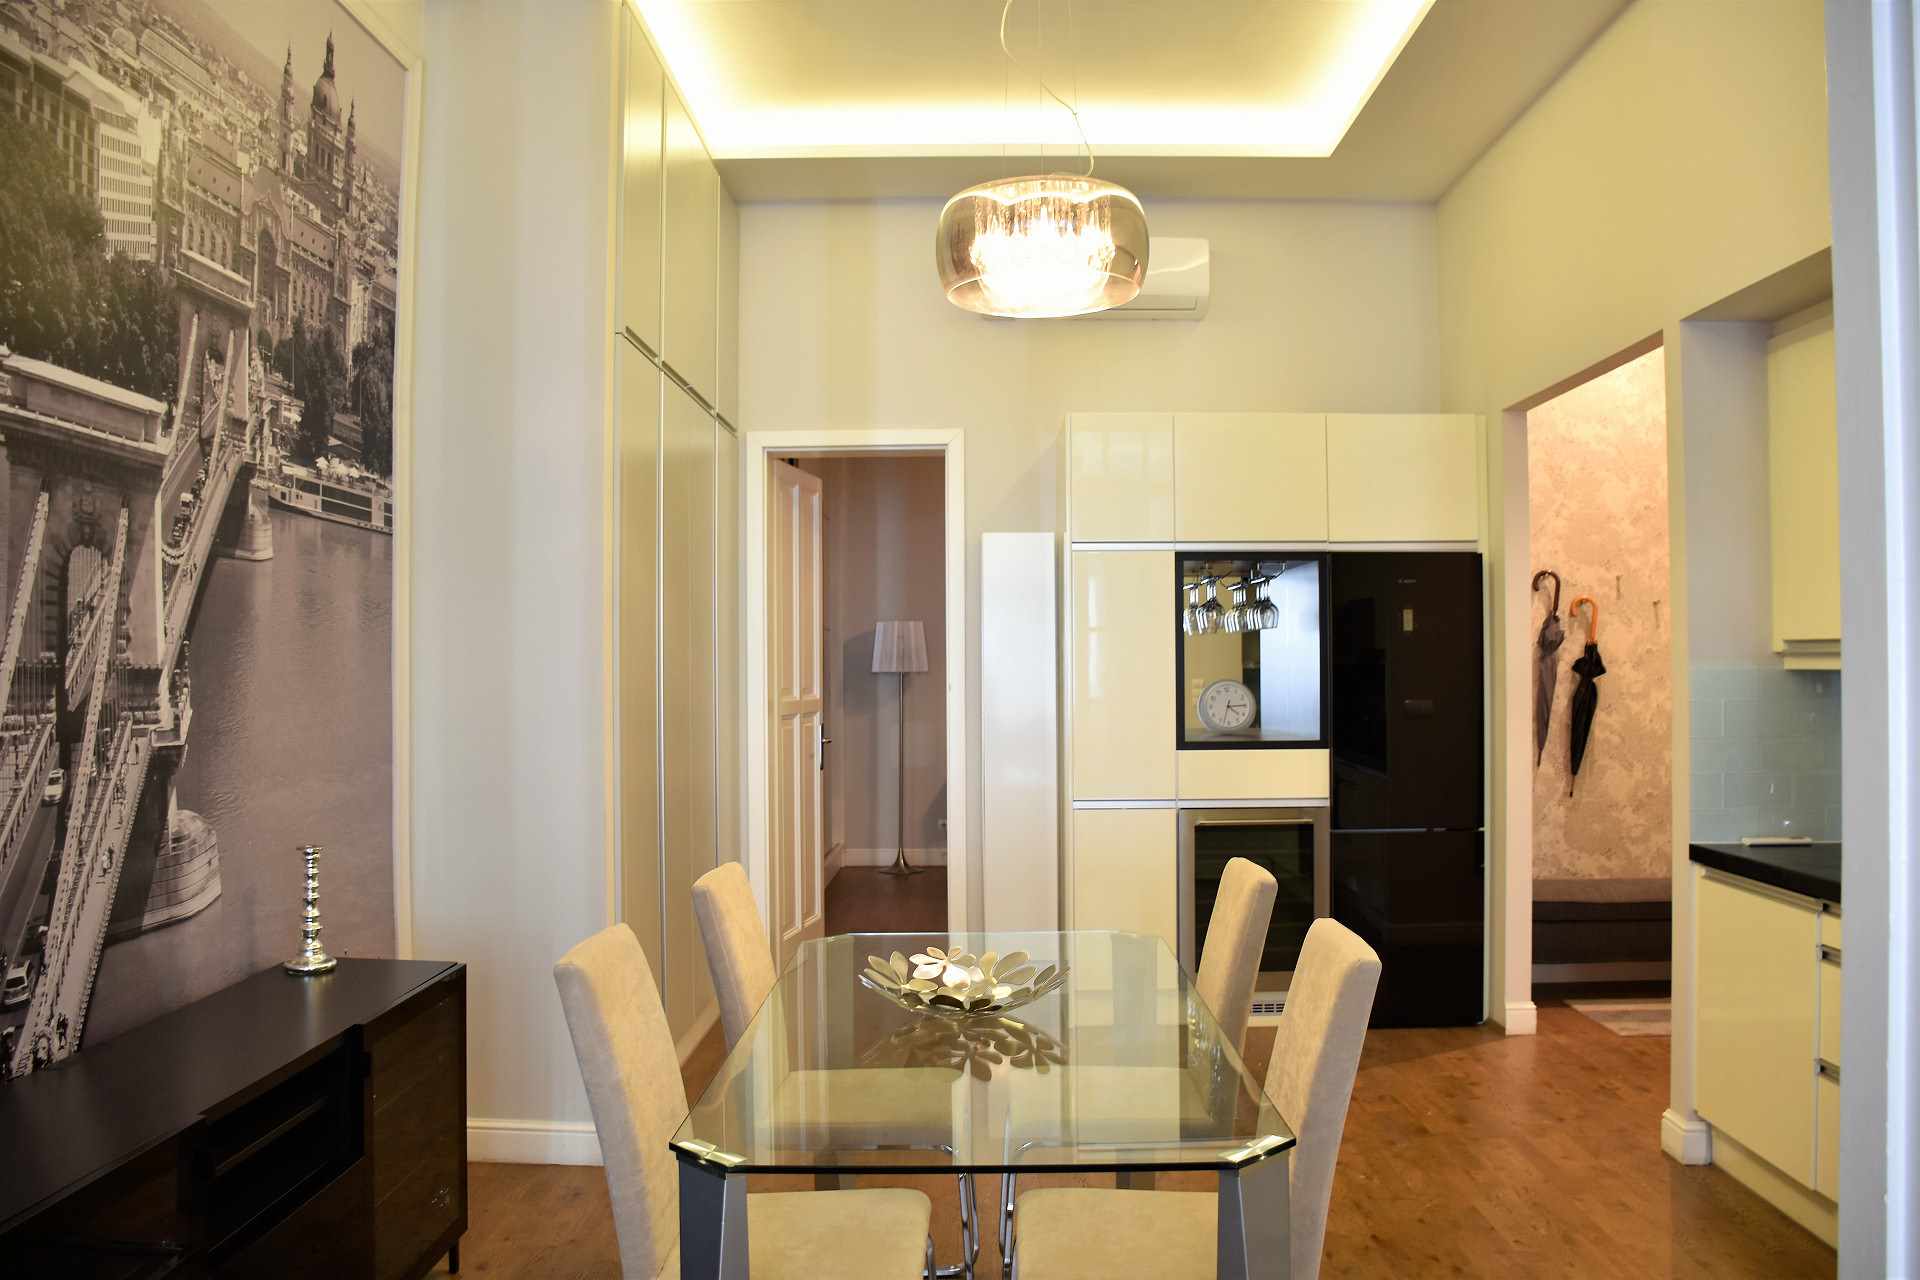 budapes-real-estate-luxury-exlusive-apartment-for-sale-near-danube-deaksquare-district511